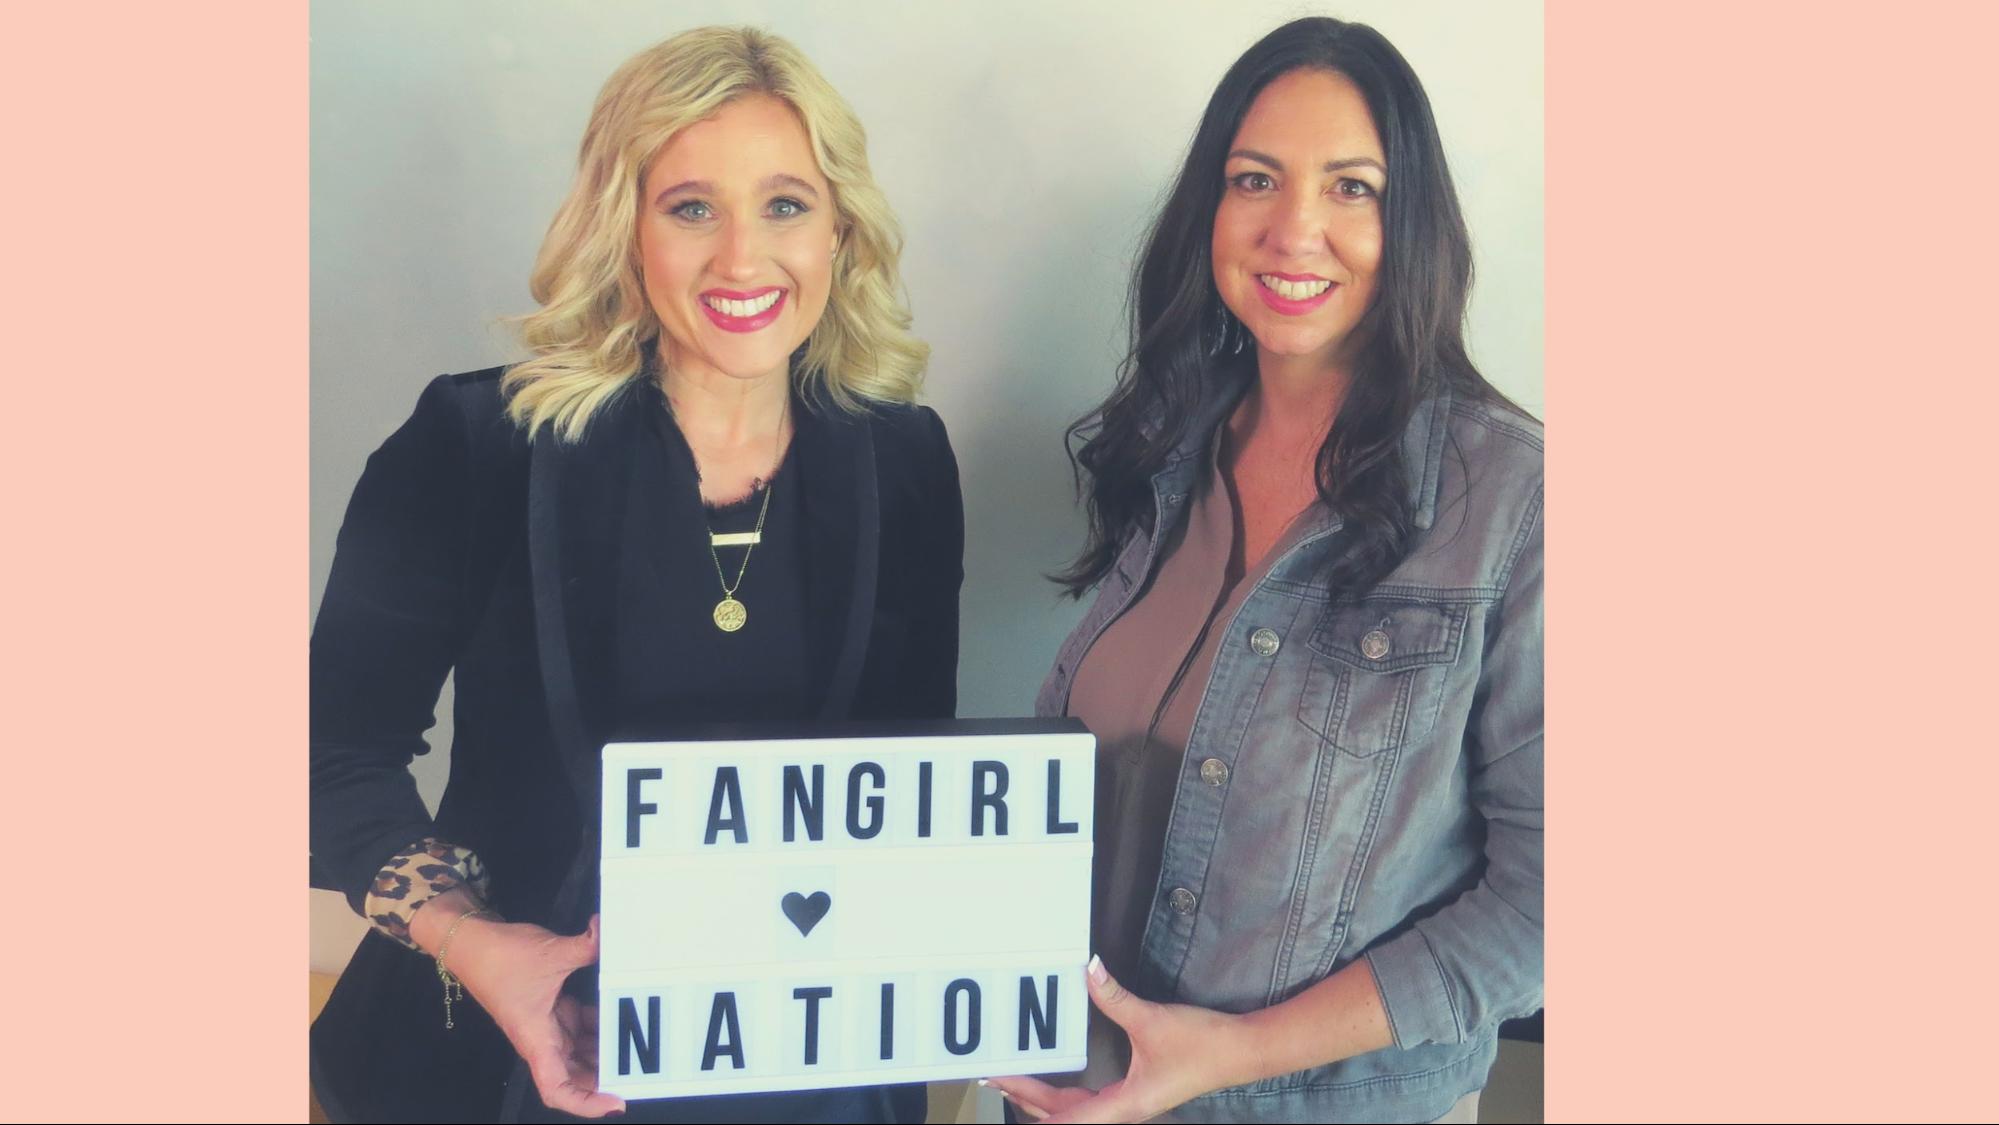 Fangirl Talk: Domestic Violence and the NFL